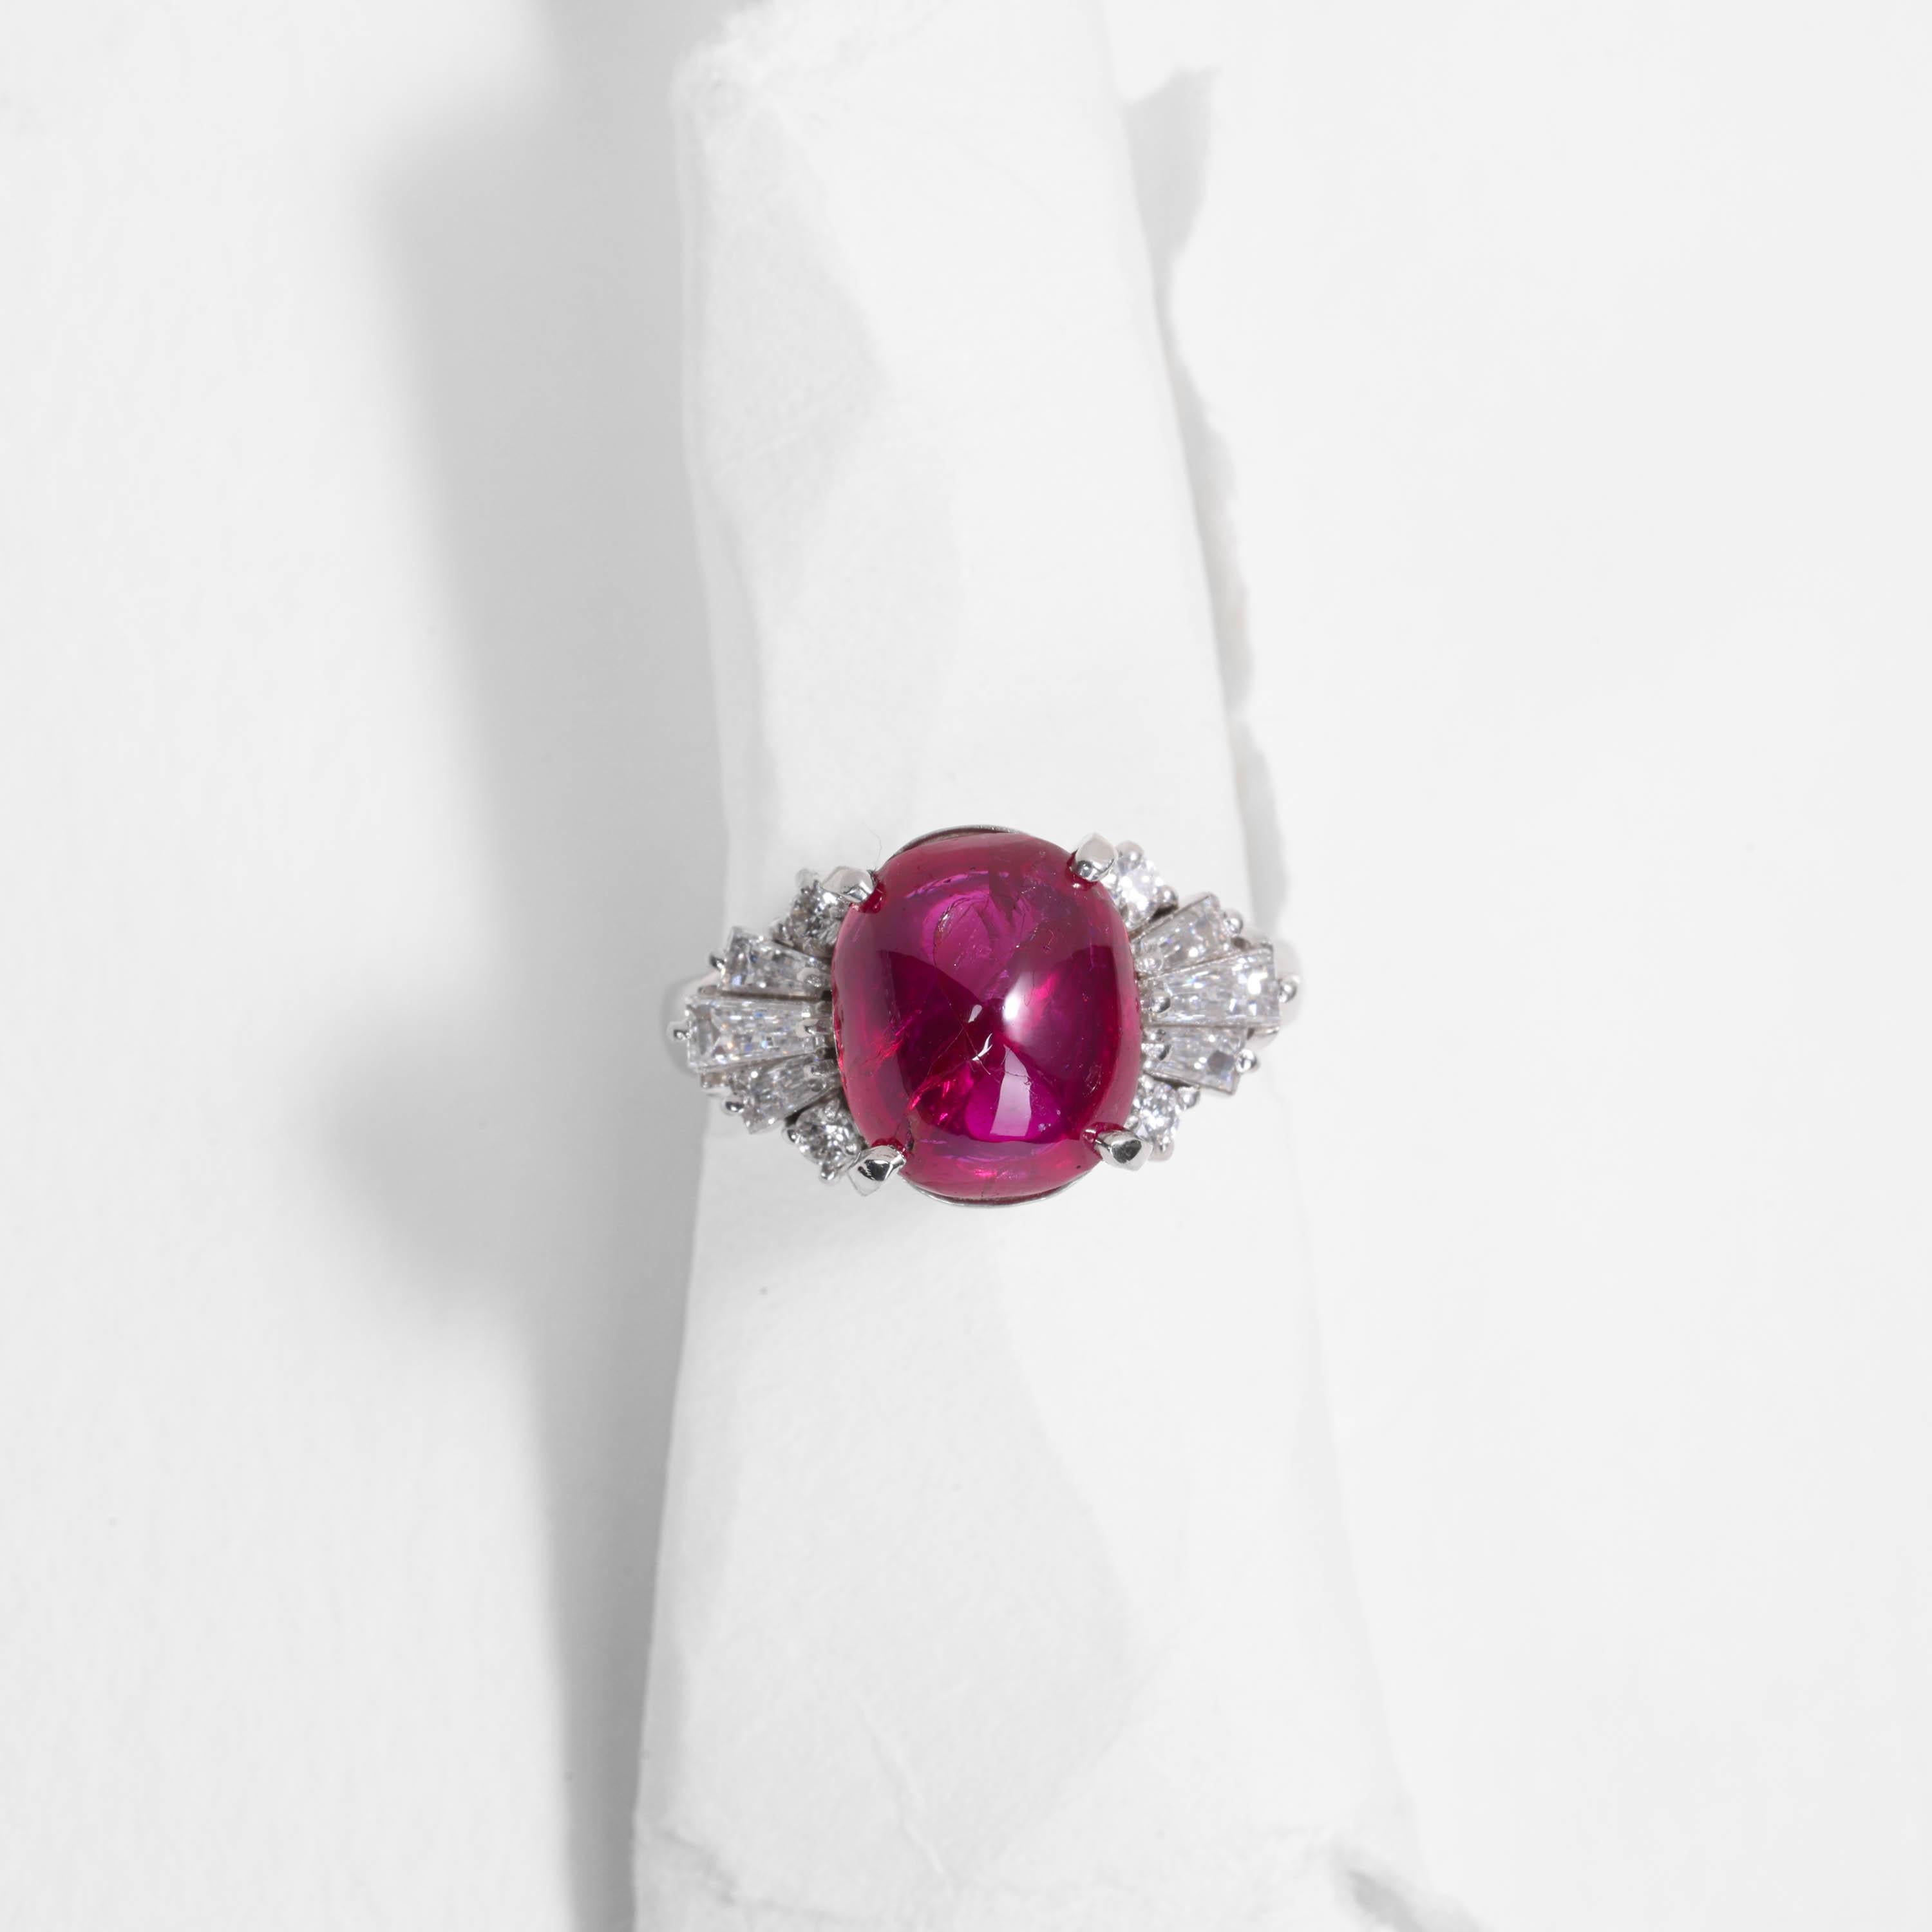 Contemporary Burma Ruby No-Heat 4.75 Carats Set in Vintage Platinum Mounting, Certified For Sale